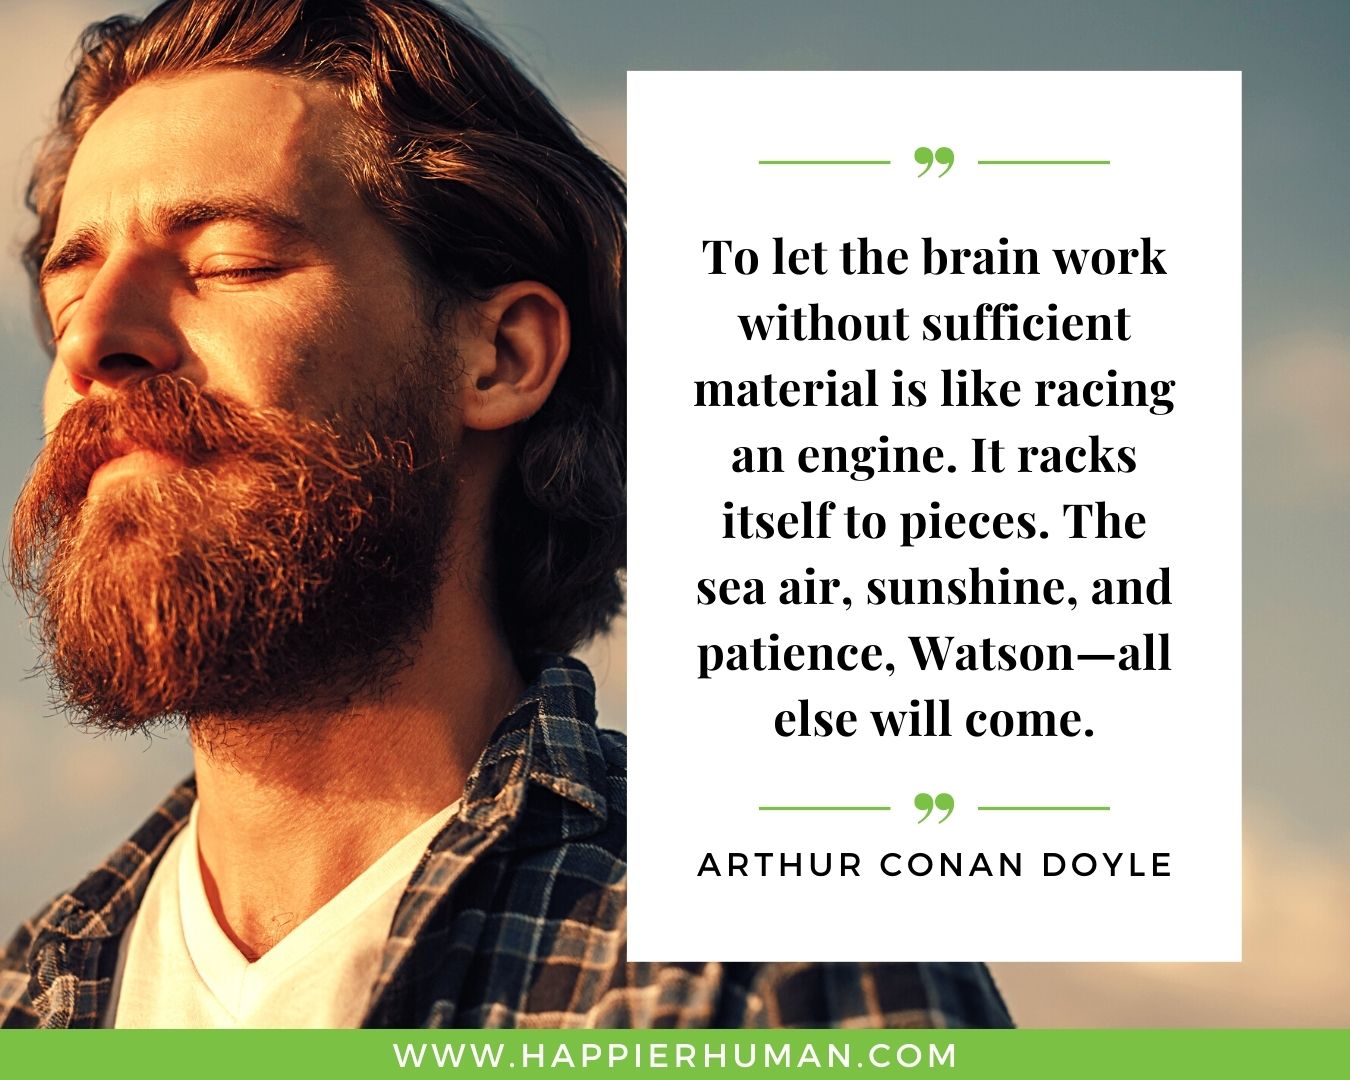 Overthinking Quotes - “To let the brain work without sufficient material is like racing an engine. It racks itself to pieces. The sea air, sunshine, and patience, Watson—all else will come.” - Arthur Conan Doyle